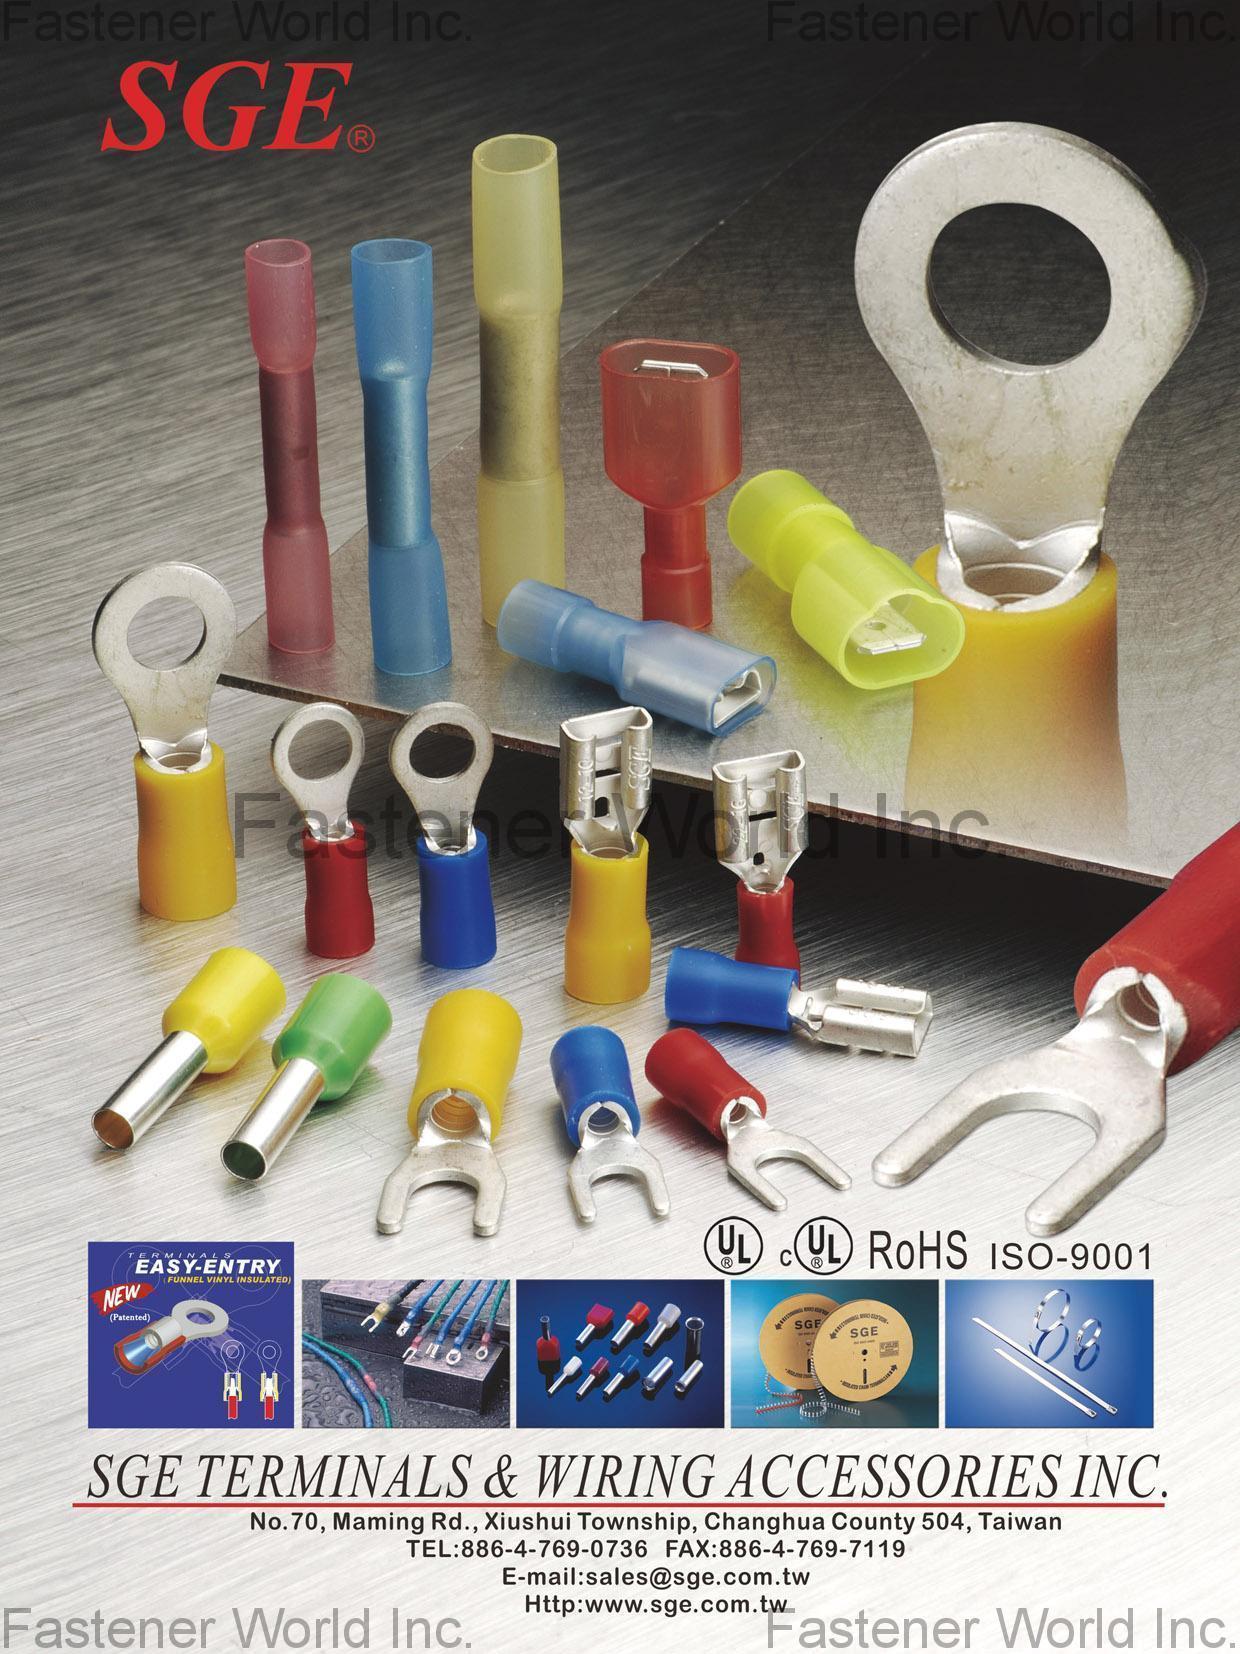 SGE TERMINALS & WIRING ACCESSORIES INC. , Non Insulated Terminals, DIN46234 Terminals, Ring Terminals, Spade Terminals, Butt & Parallel Connectors, Cord End Sleeves, Cable Ties, Crimp Tools , Terminal Pins